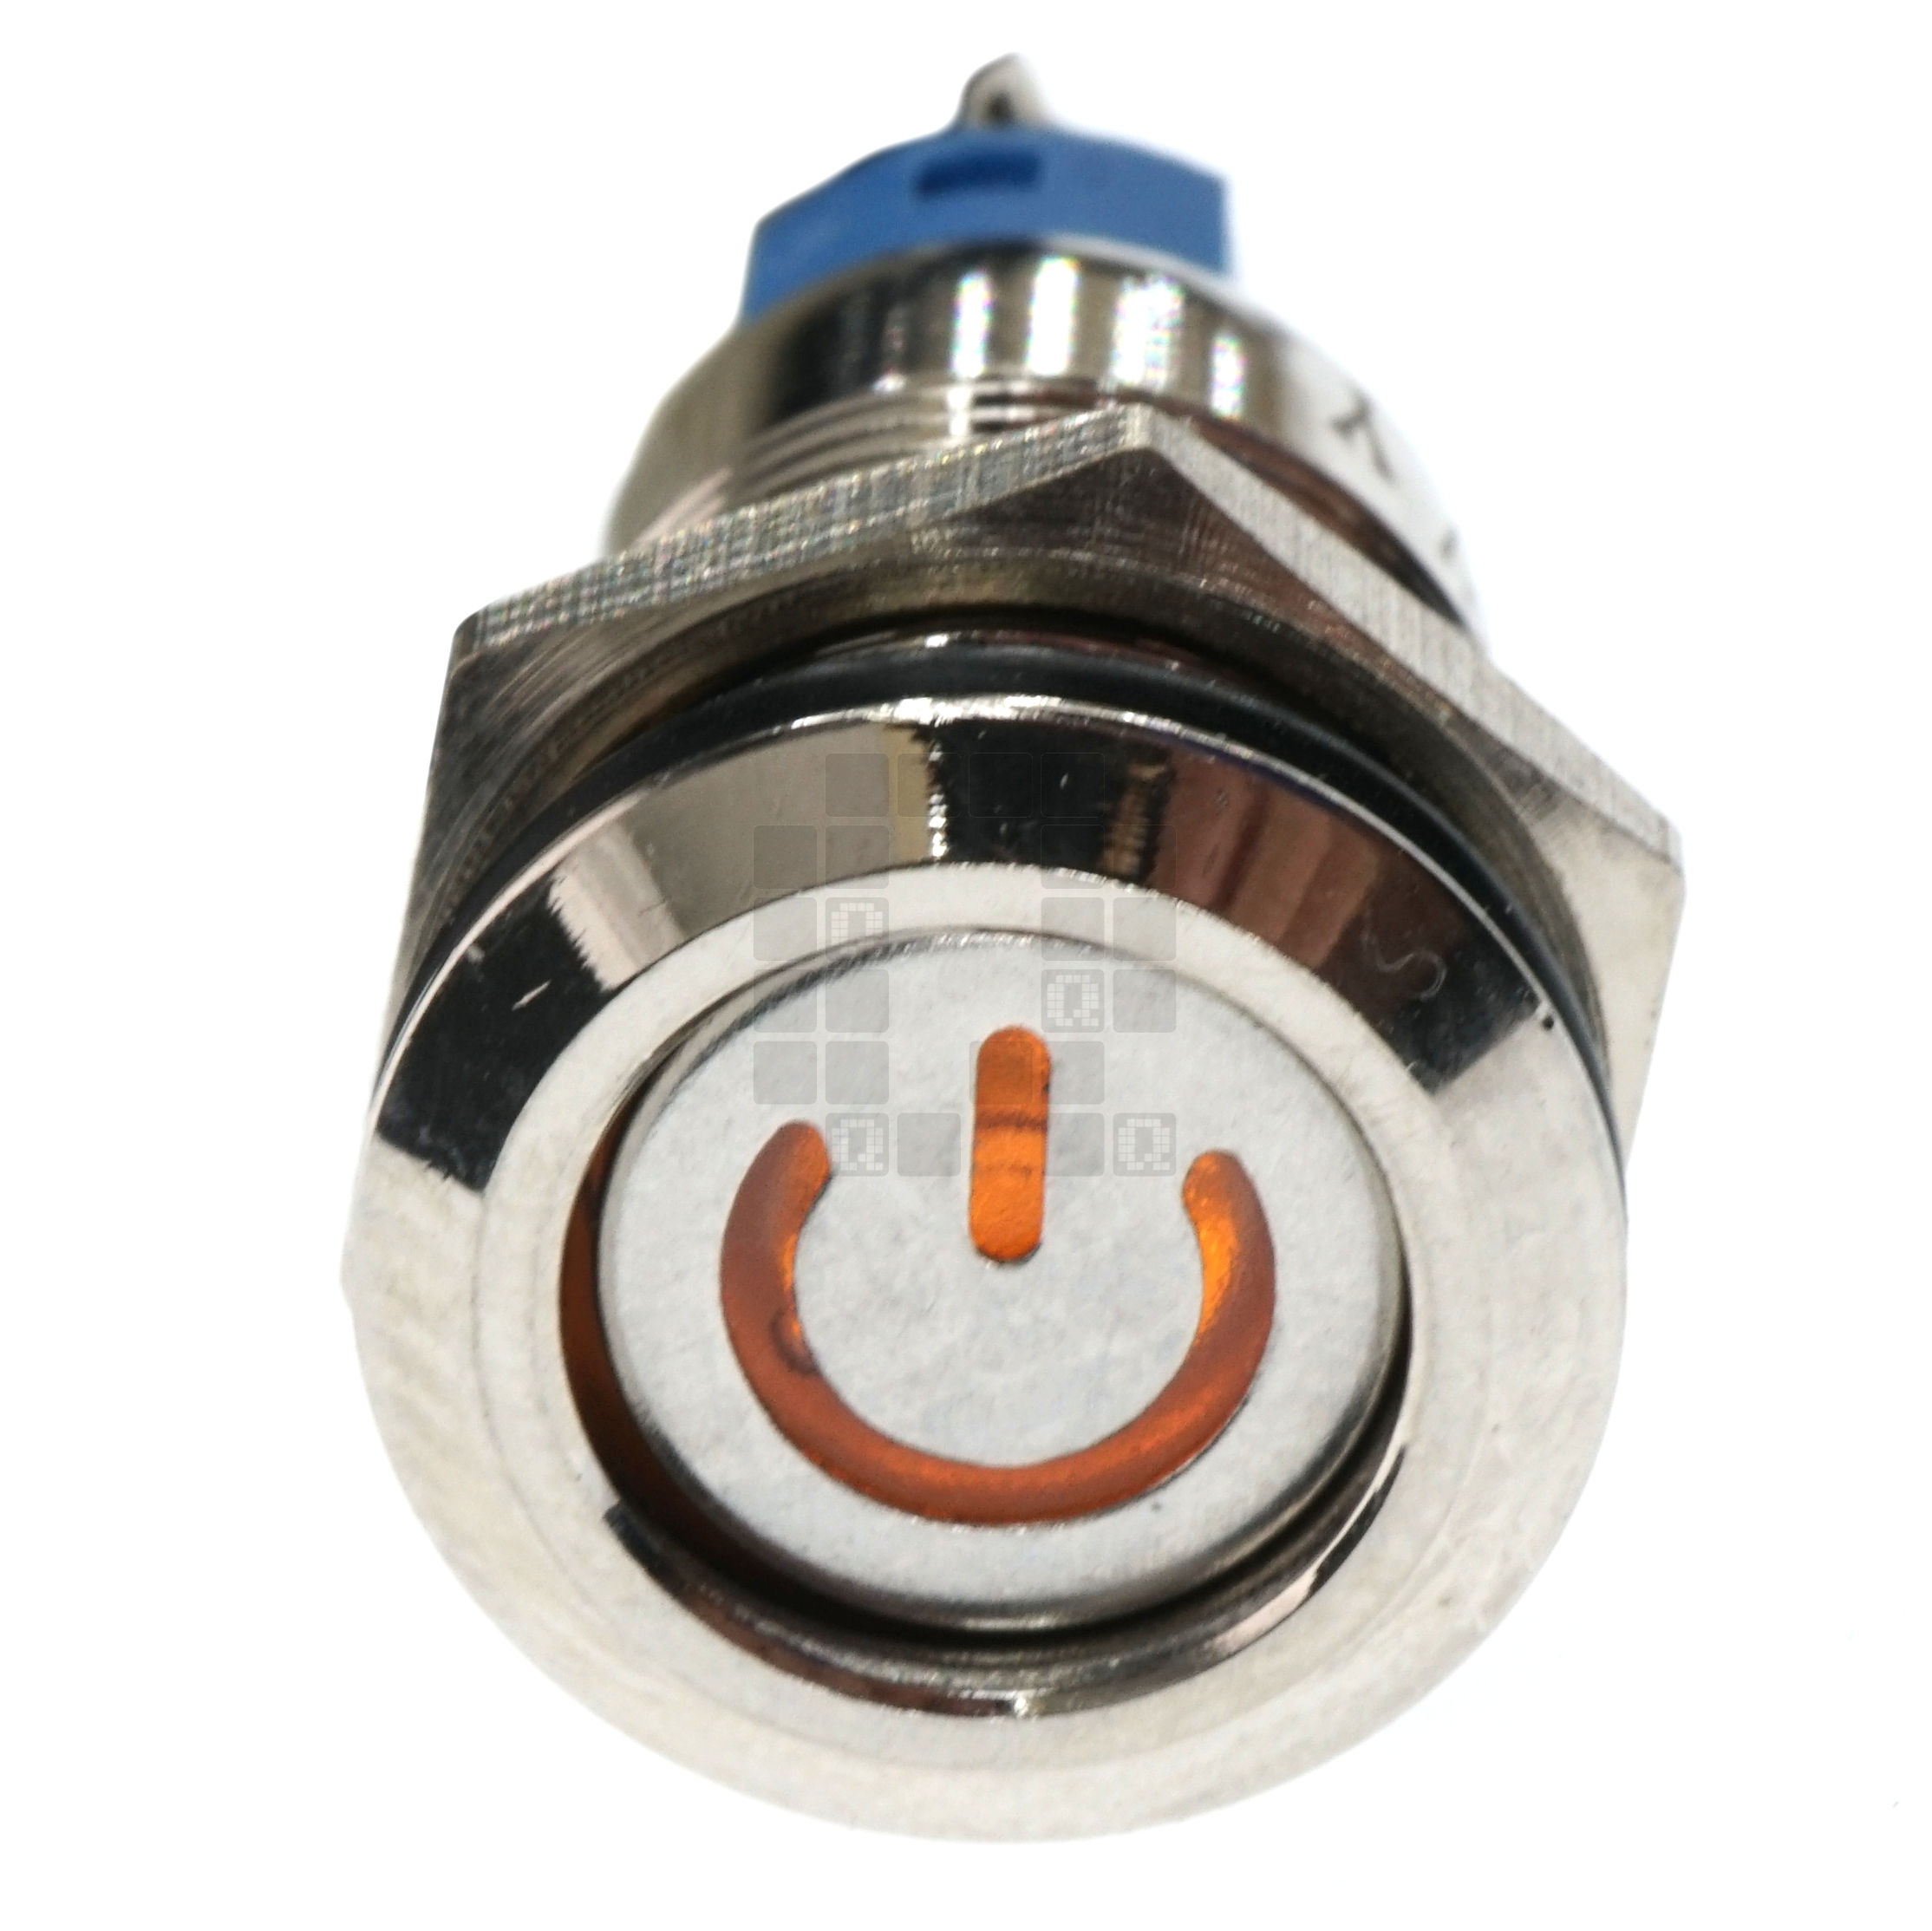 12mm Threaded Metal Pushbutton, Maintained/Locking, Yellow LED, 12-24VDC, Lighted Power Symbol, IP65, SPST